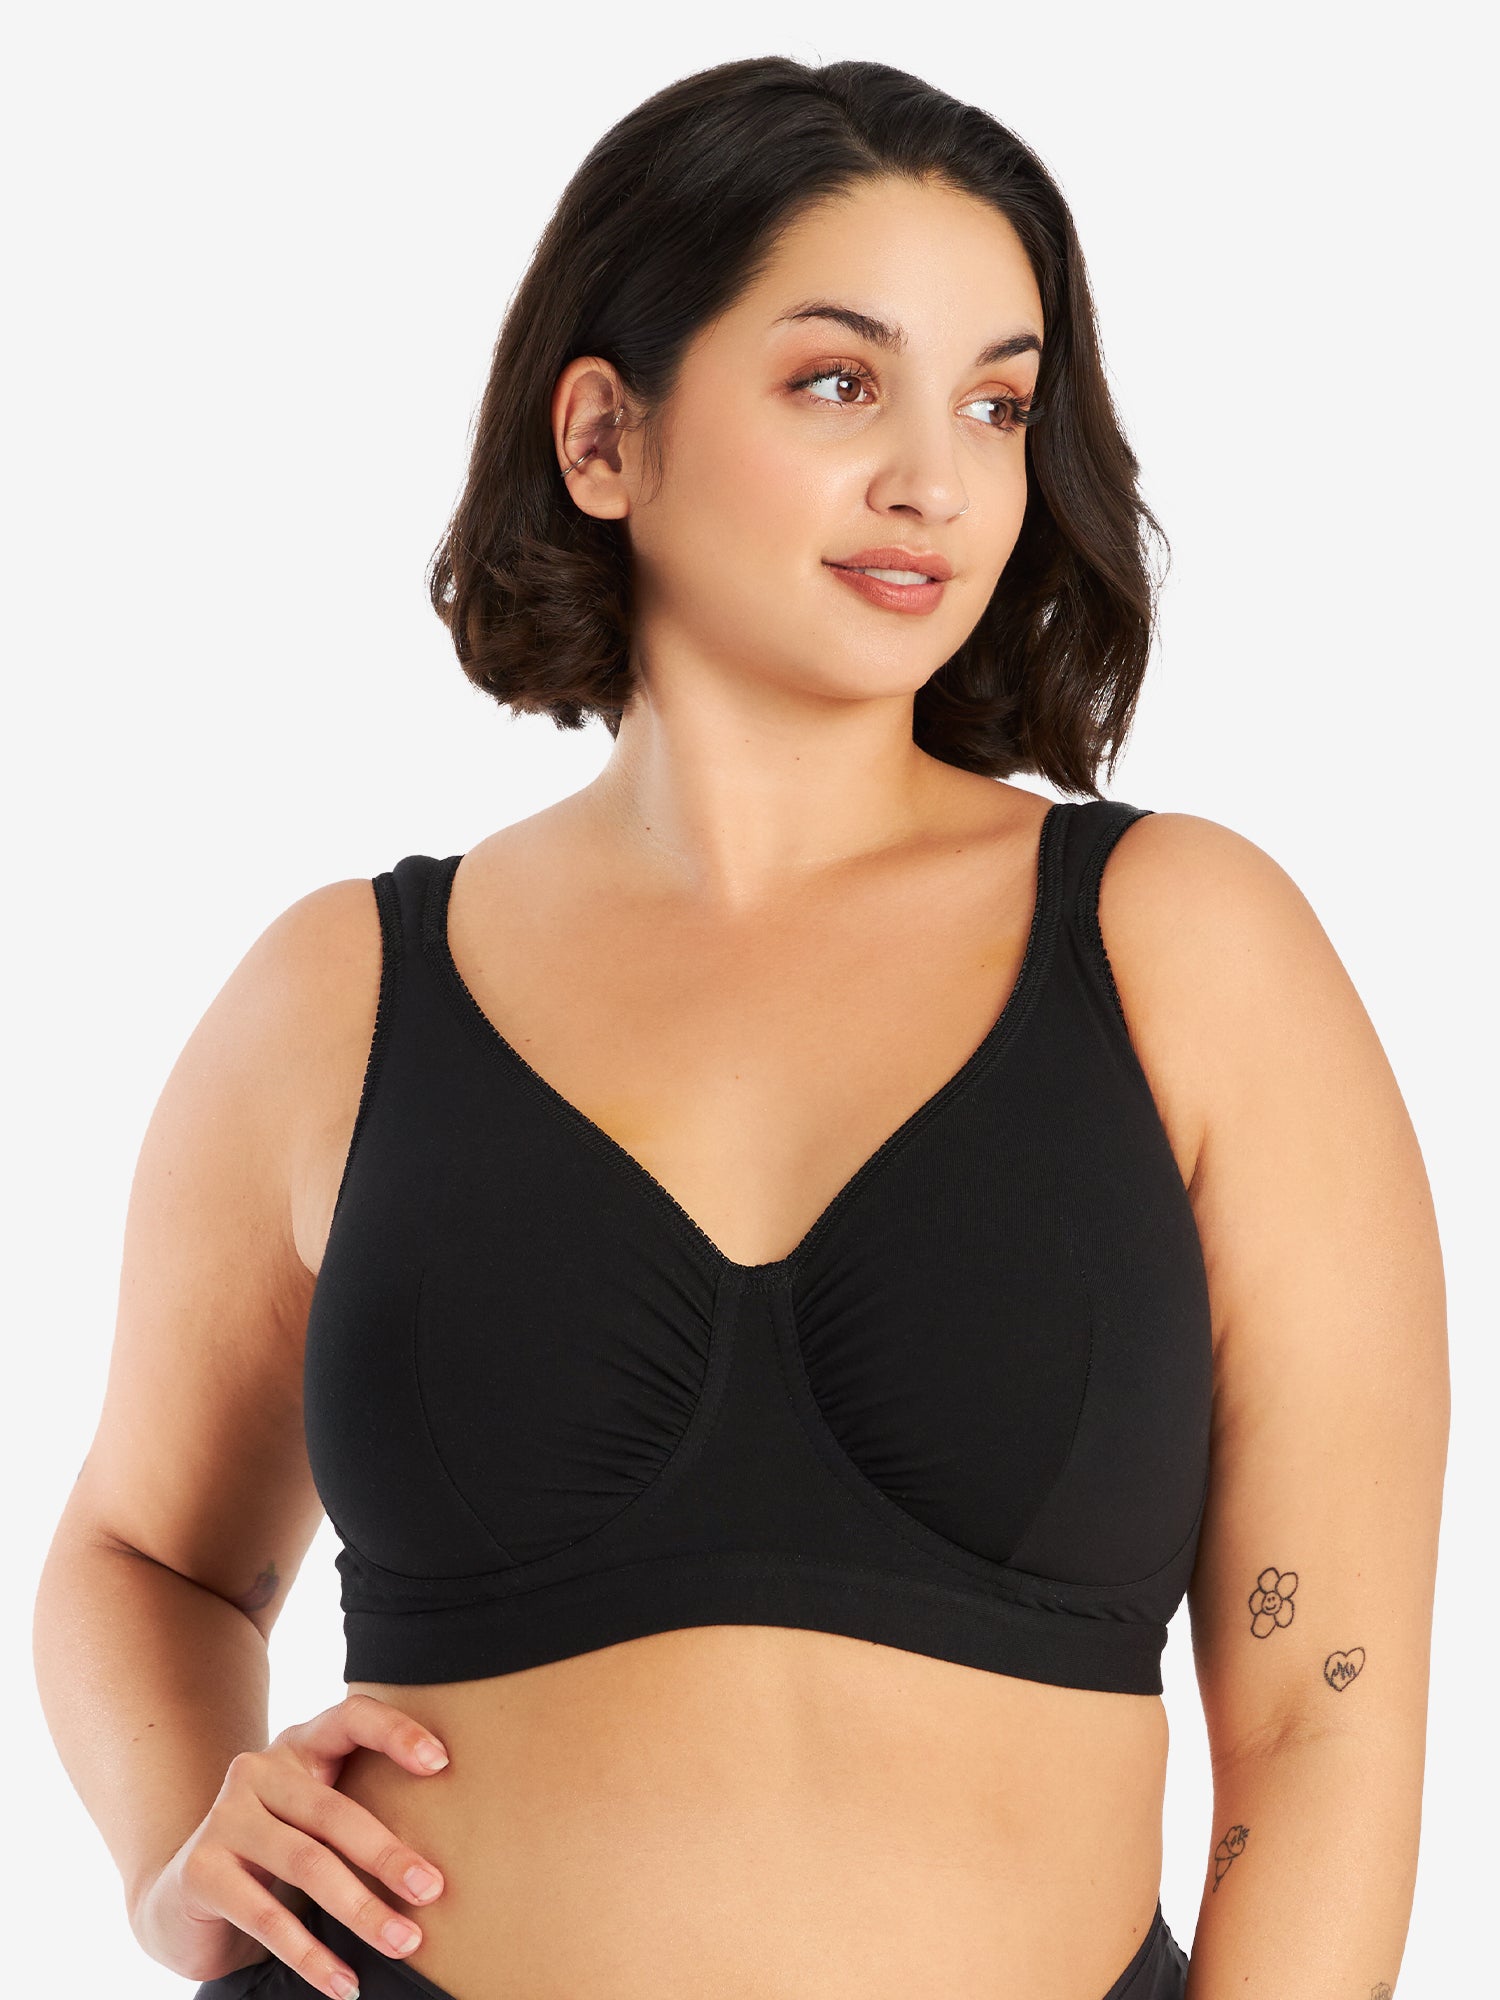 CVG Calm Your Tits Bra  Adjustable, Supportive and Unbelievably Comfo